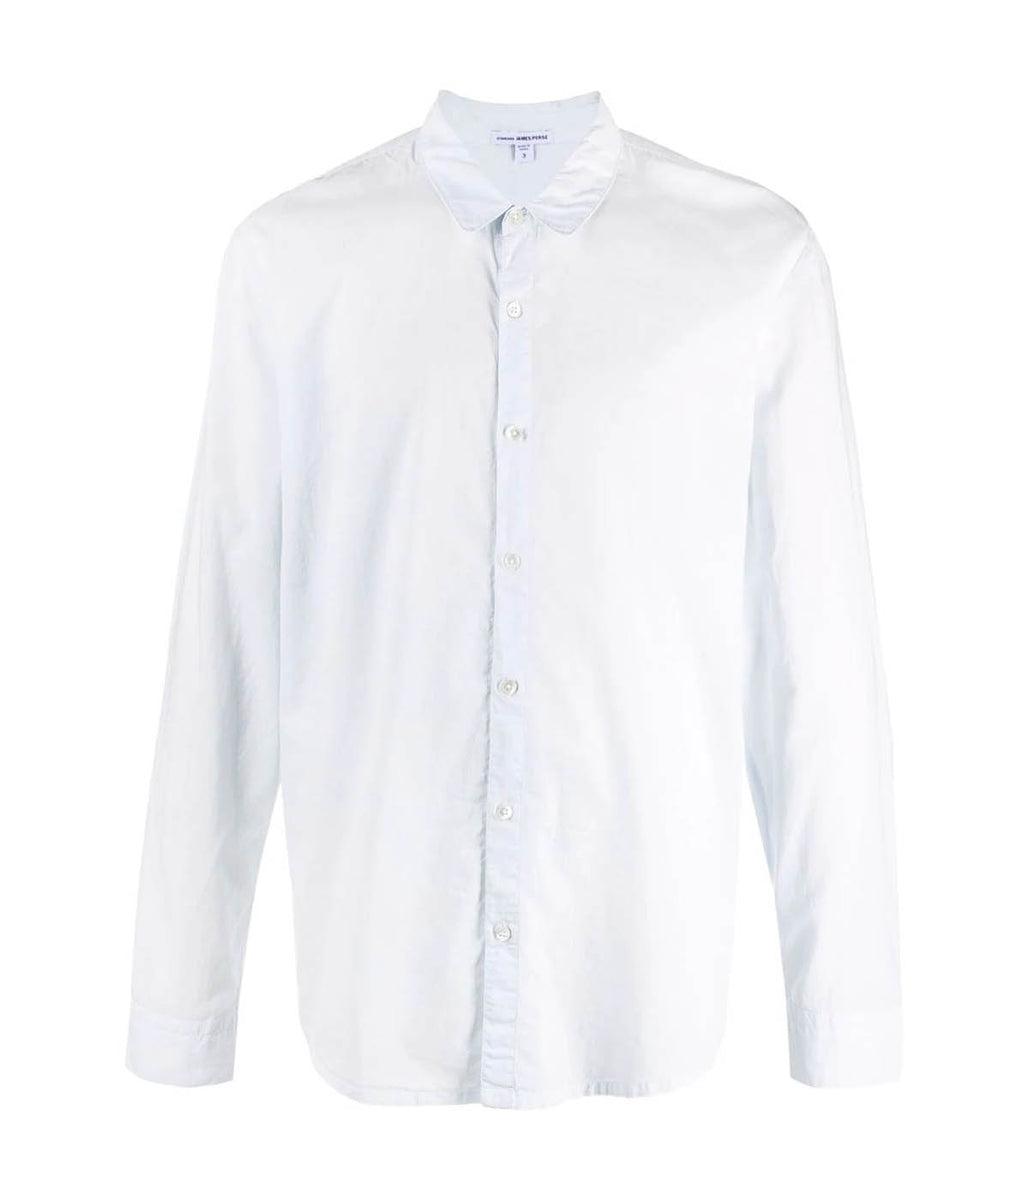 Standard Shirt in Ice Blue Pigment – Calexico Man